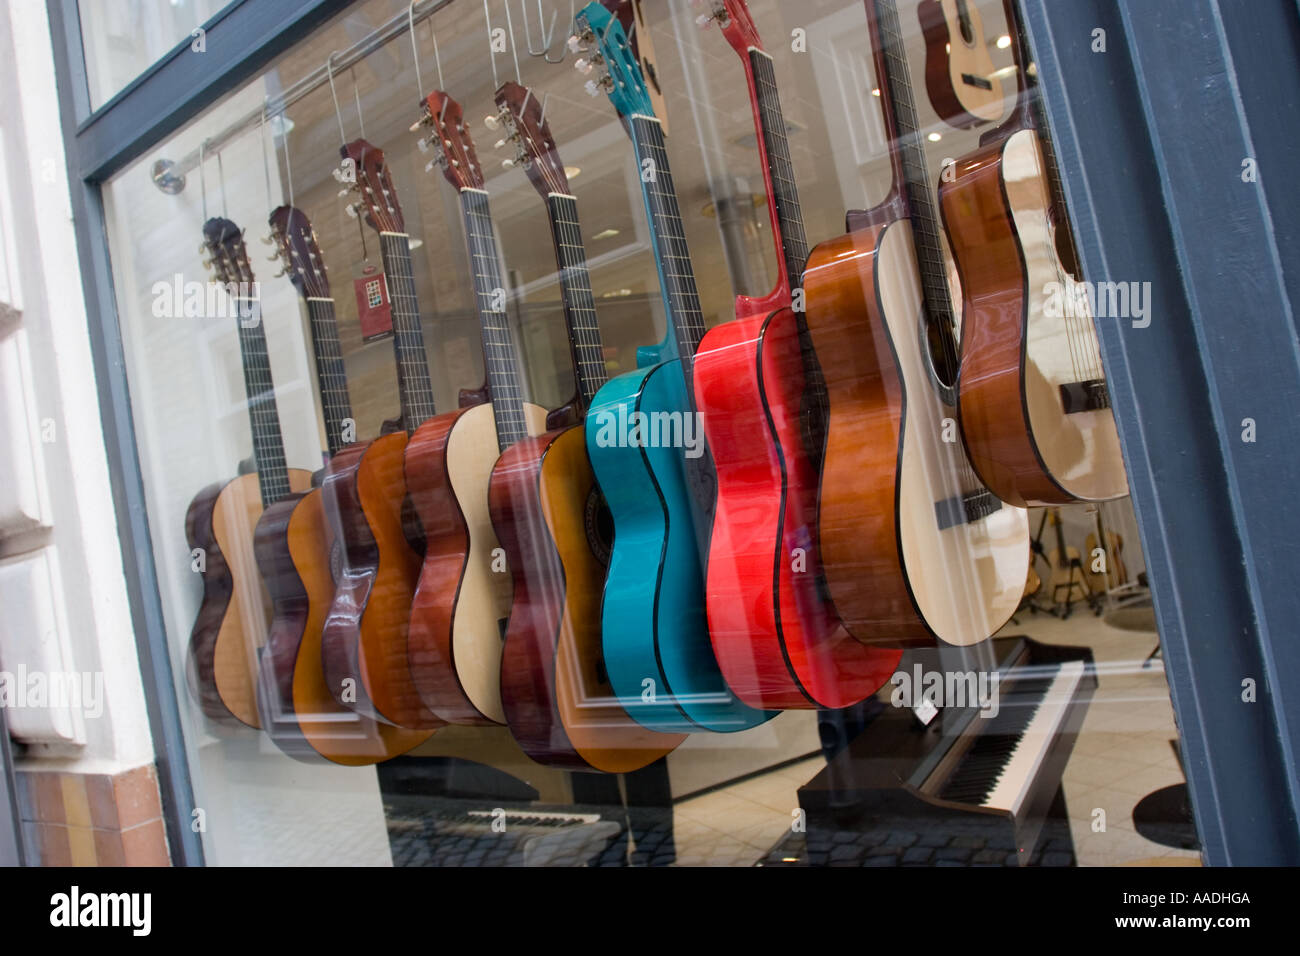 Row of Coloured  guitars in shop window, Schwerin, the capital of Mecklenburg-Vorpommern North Germany EU Stock Photo